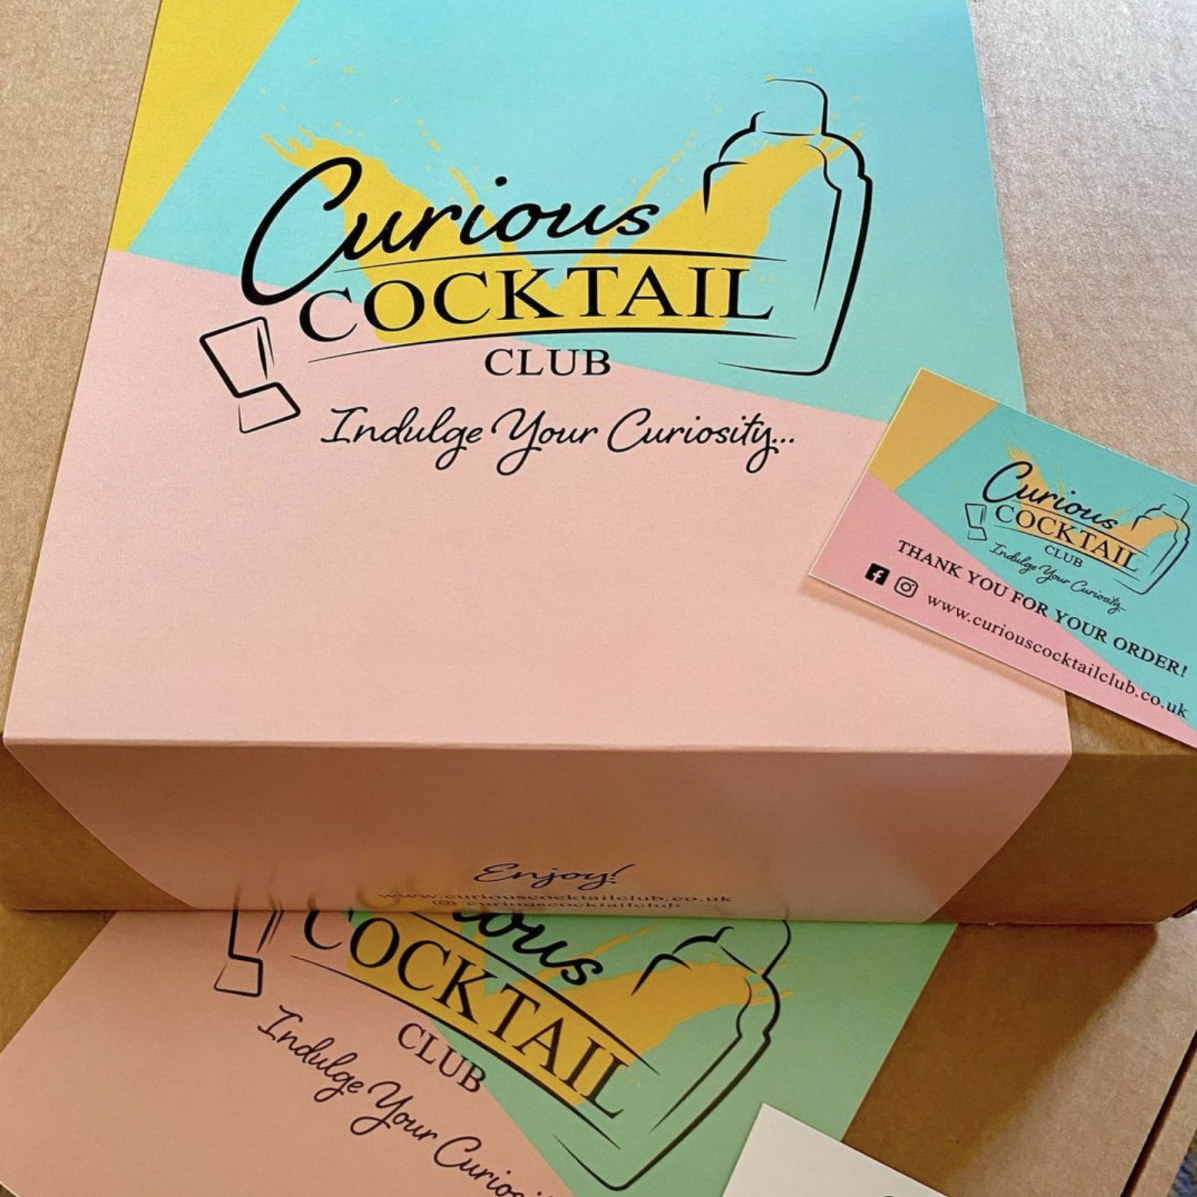 Curious Cocktail Subscription box sleeve design featuring logo design on brand colours - pink aqua and yellow